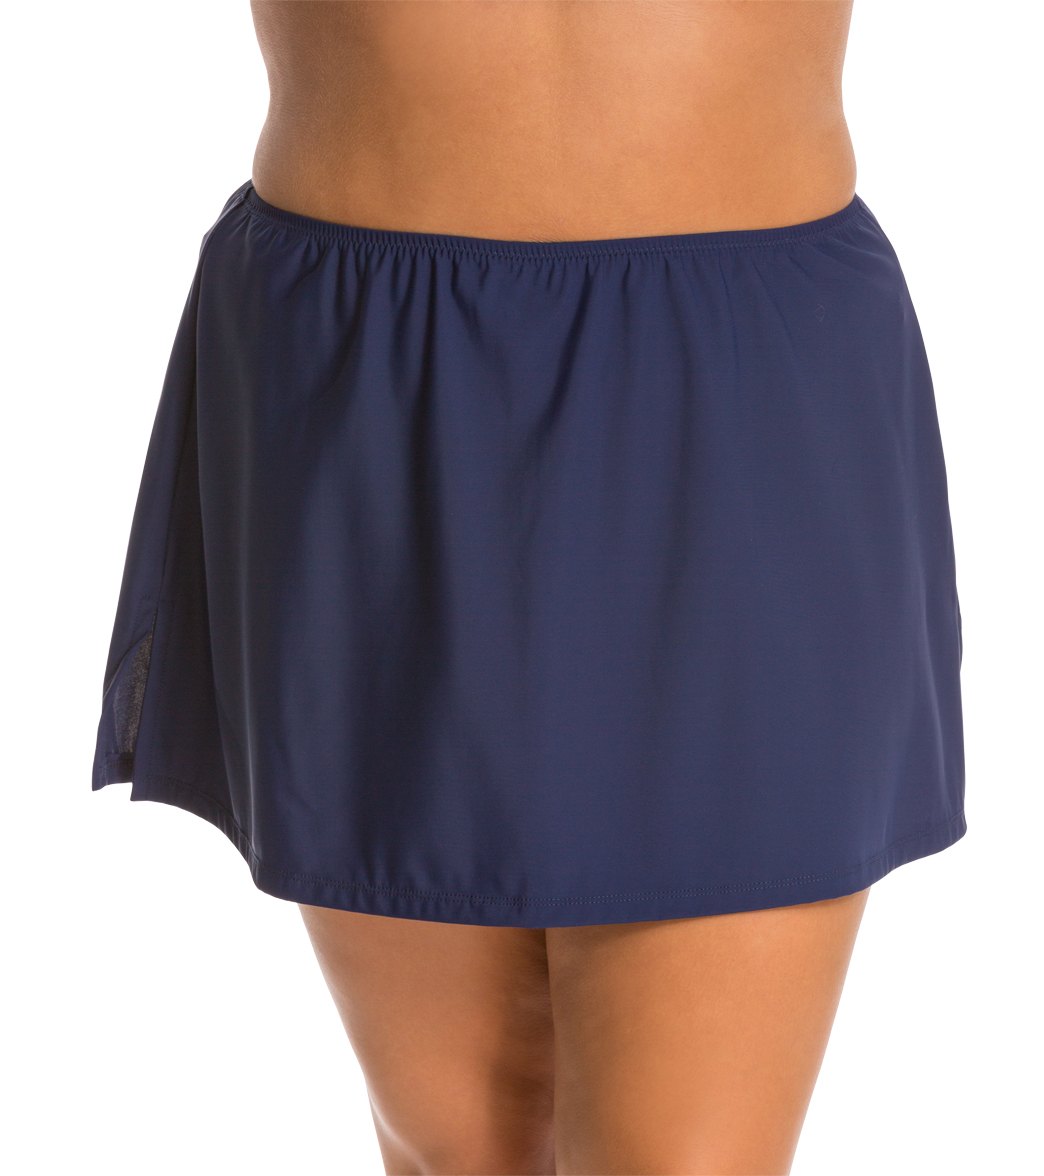 Topanga Plus Size Solid Cover Up Skirt at SwimOutlet.com